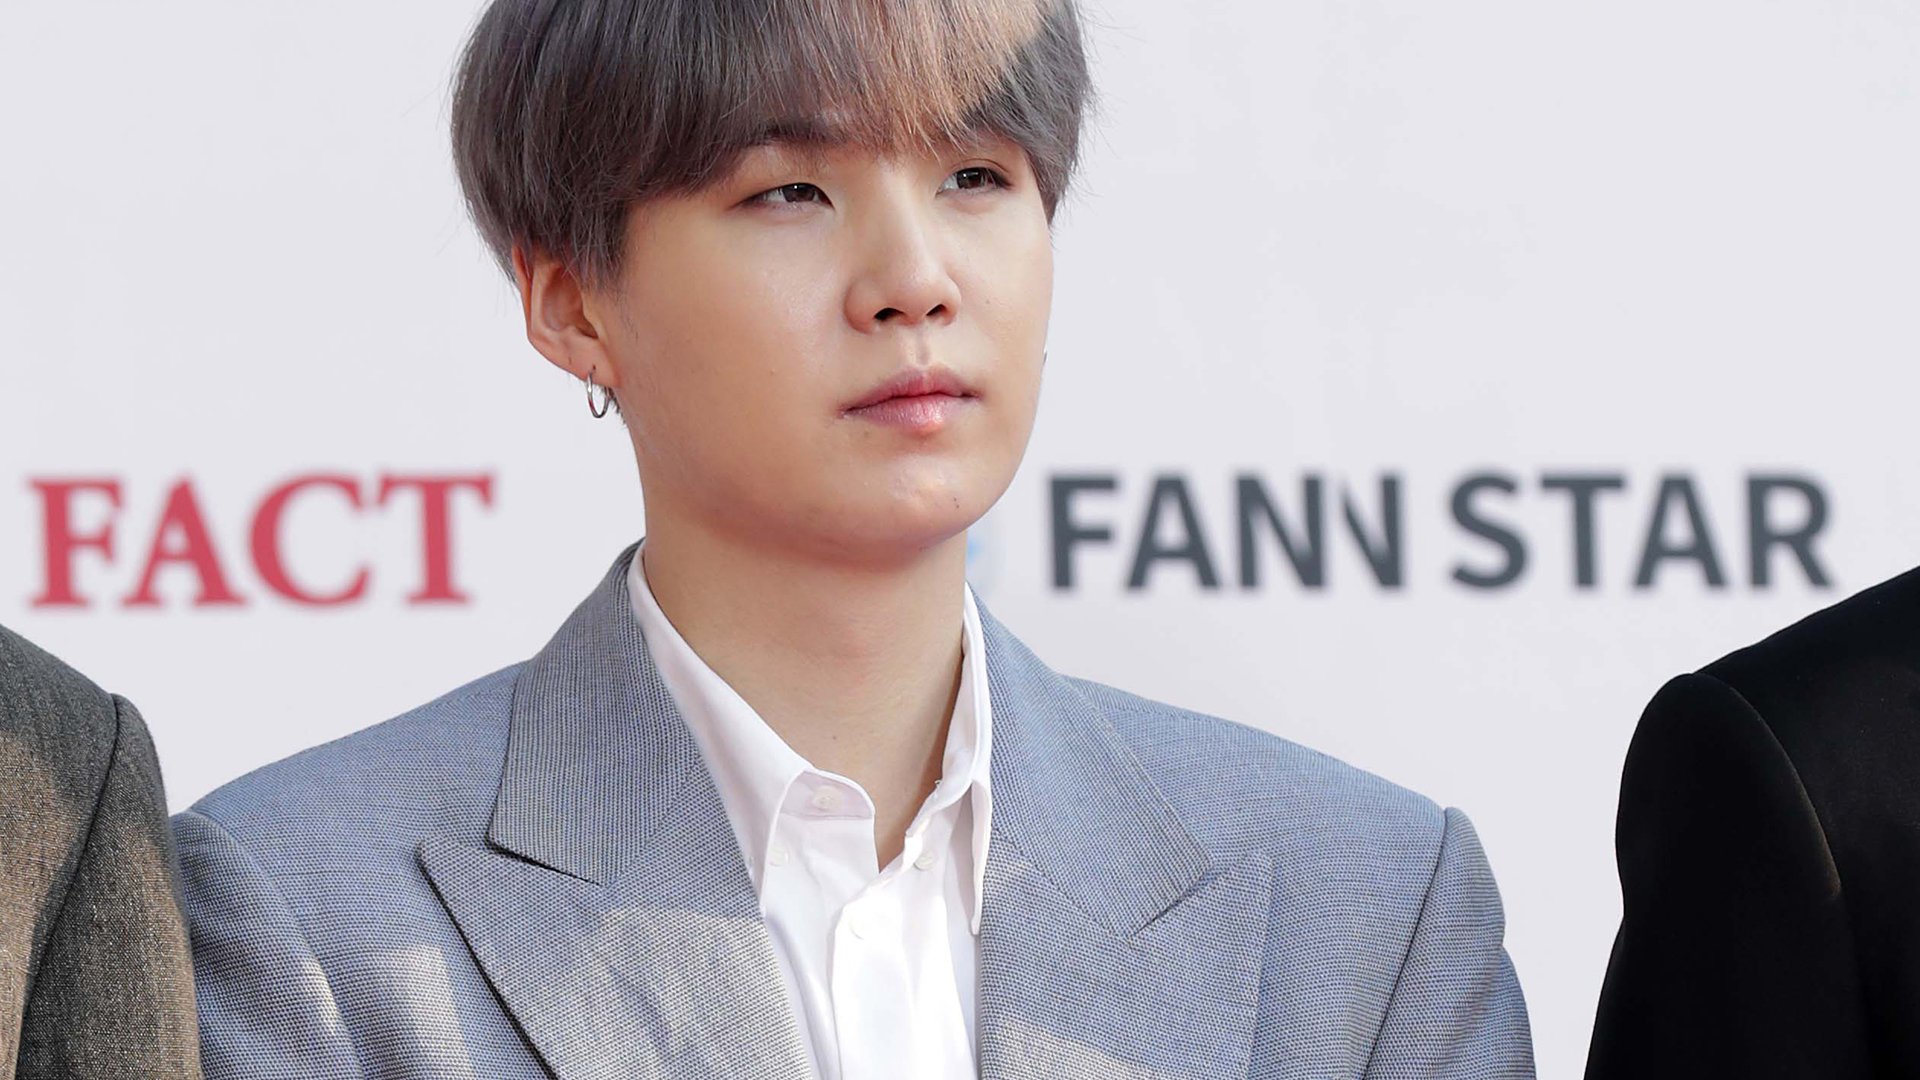 Suga of boy band BTS attends the photocall for U Plus 5G 'The Fact Music Awards' on April 24, 2019